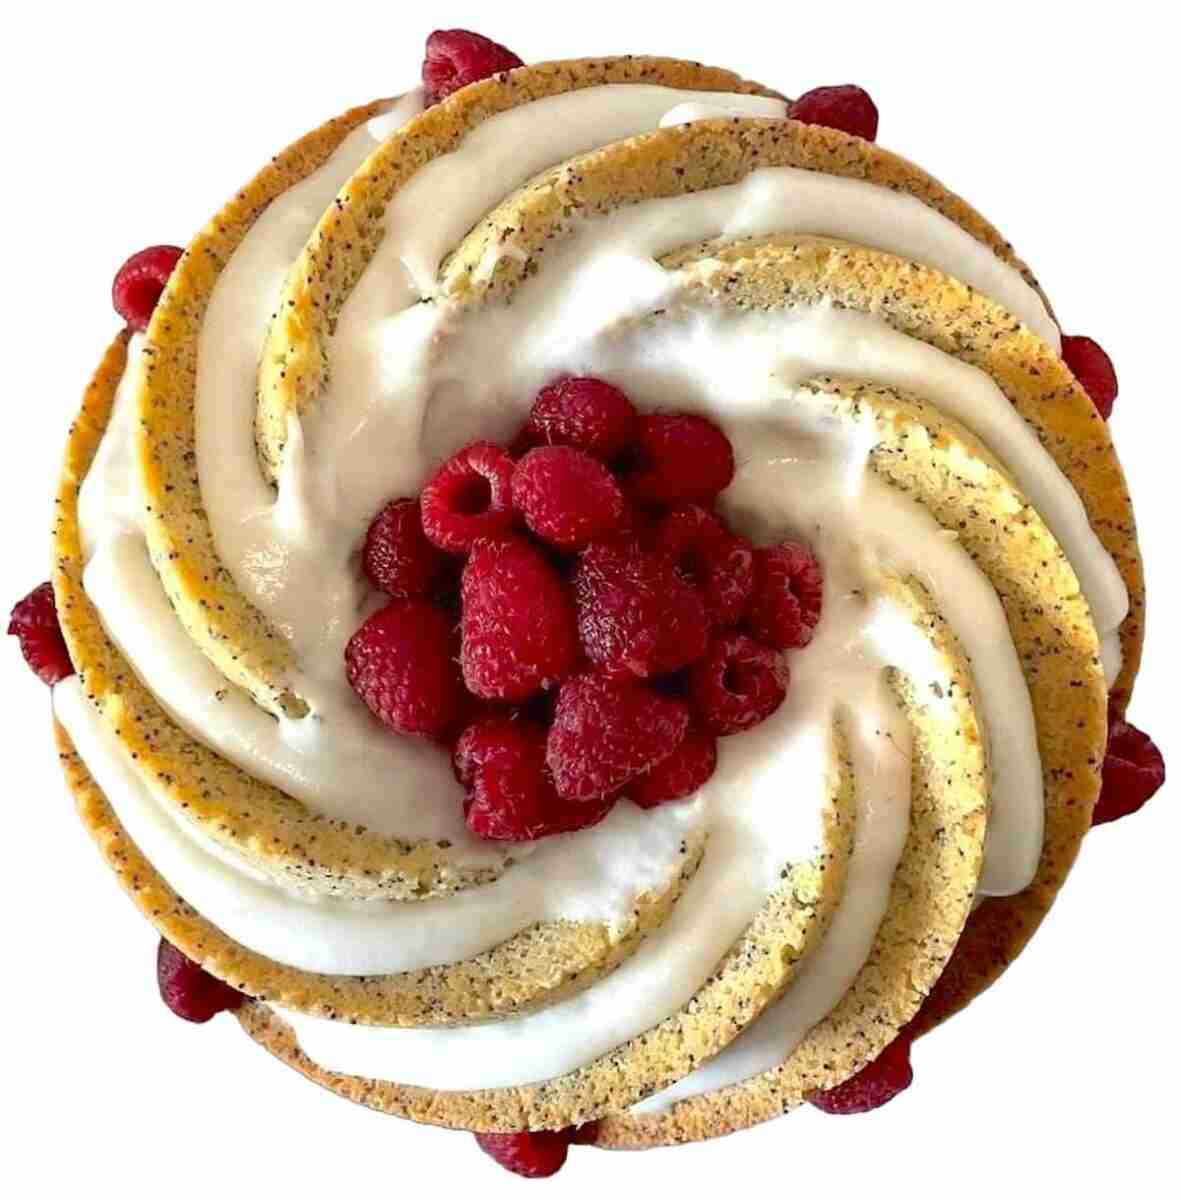 KETO lemon poppy seed cake with lemon icing and raspberries in the center photographed from above.